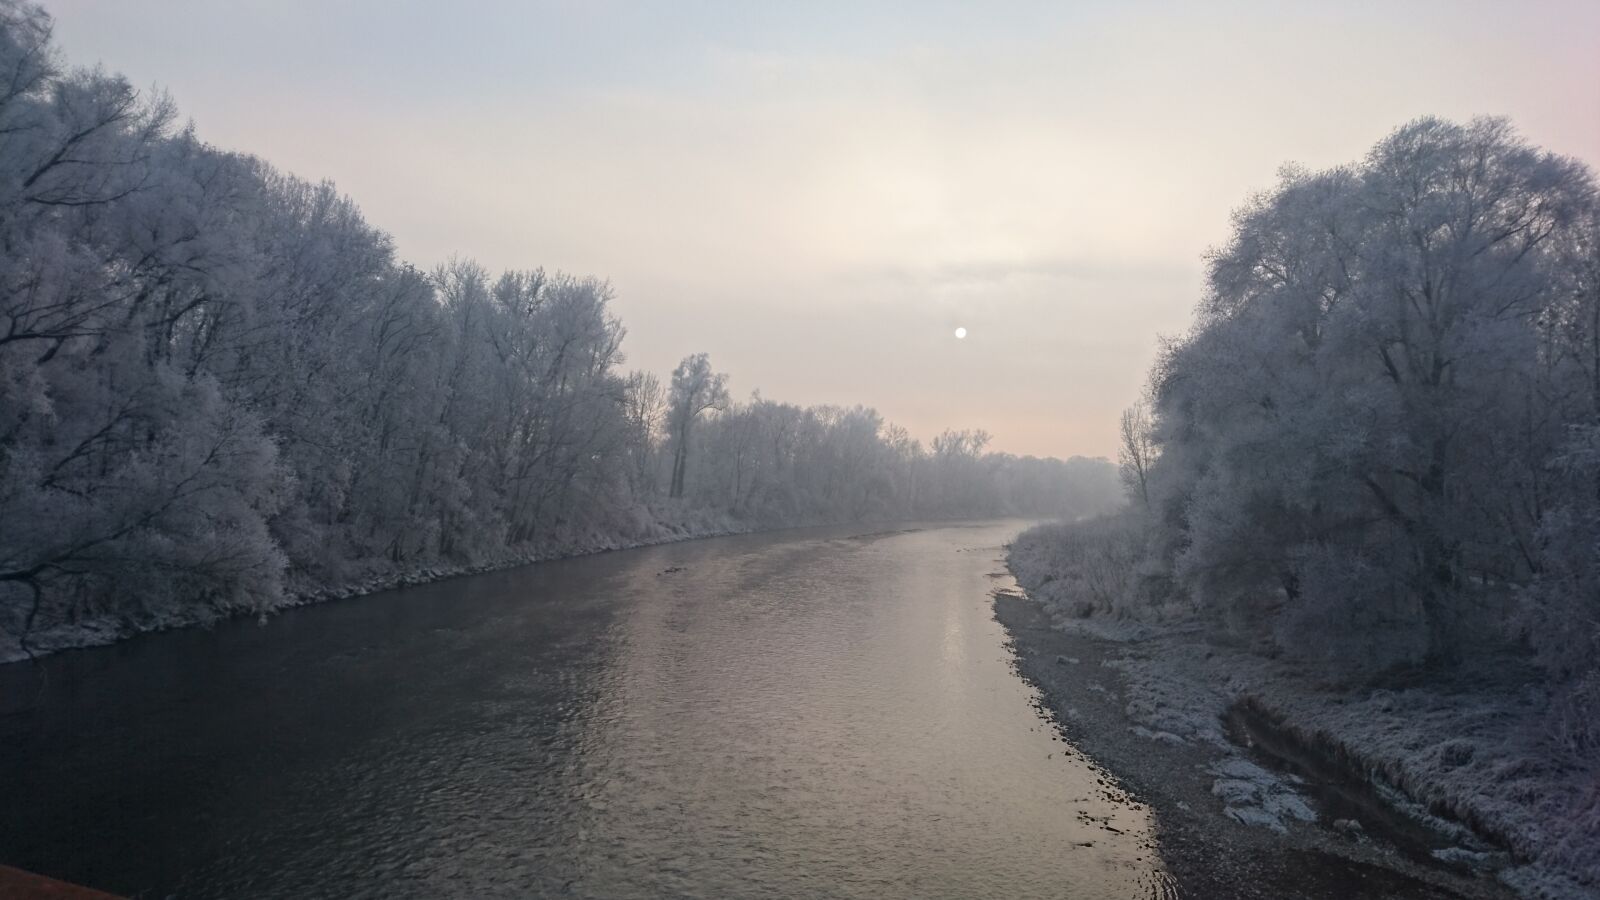 Sony Xperia Z5 Compact sample photo. Isar, winter, landscape photography